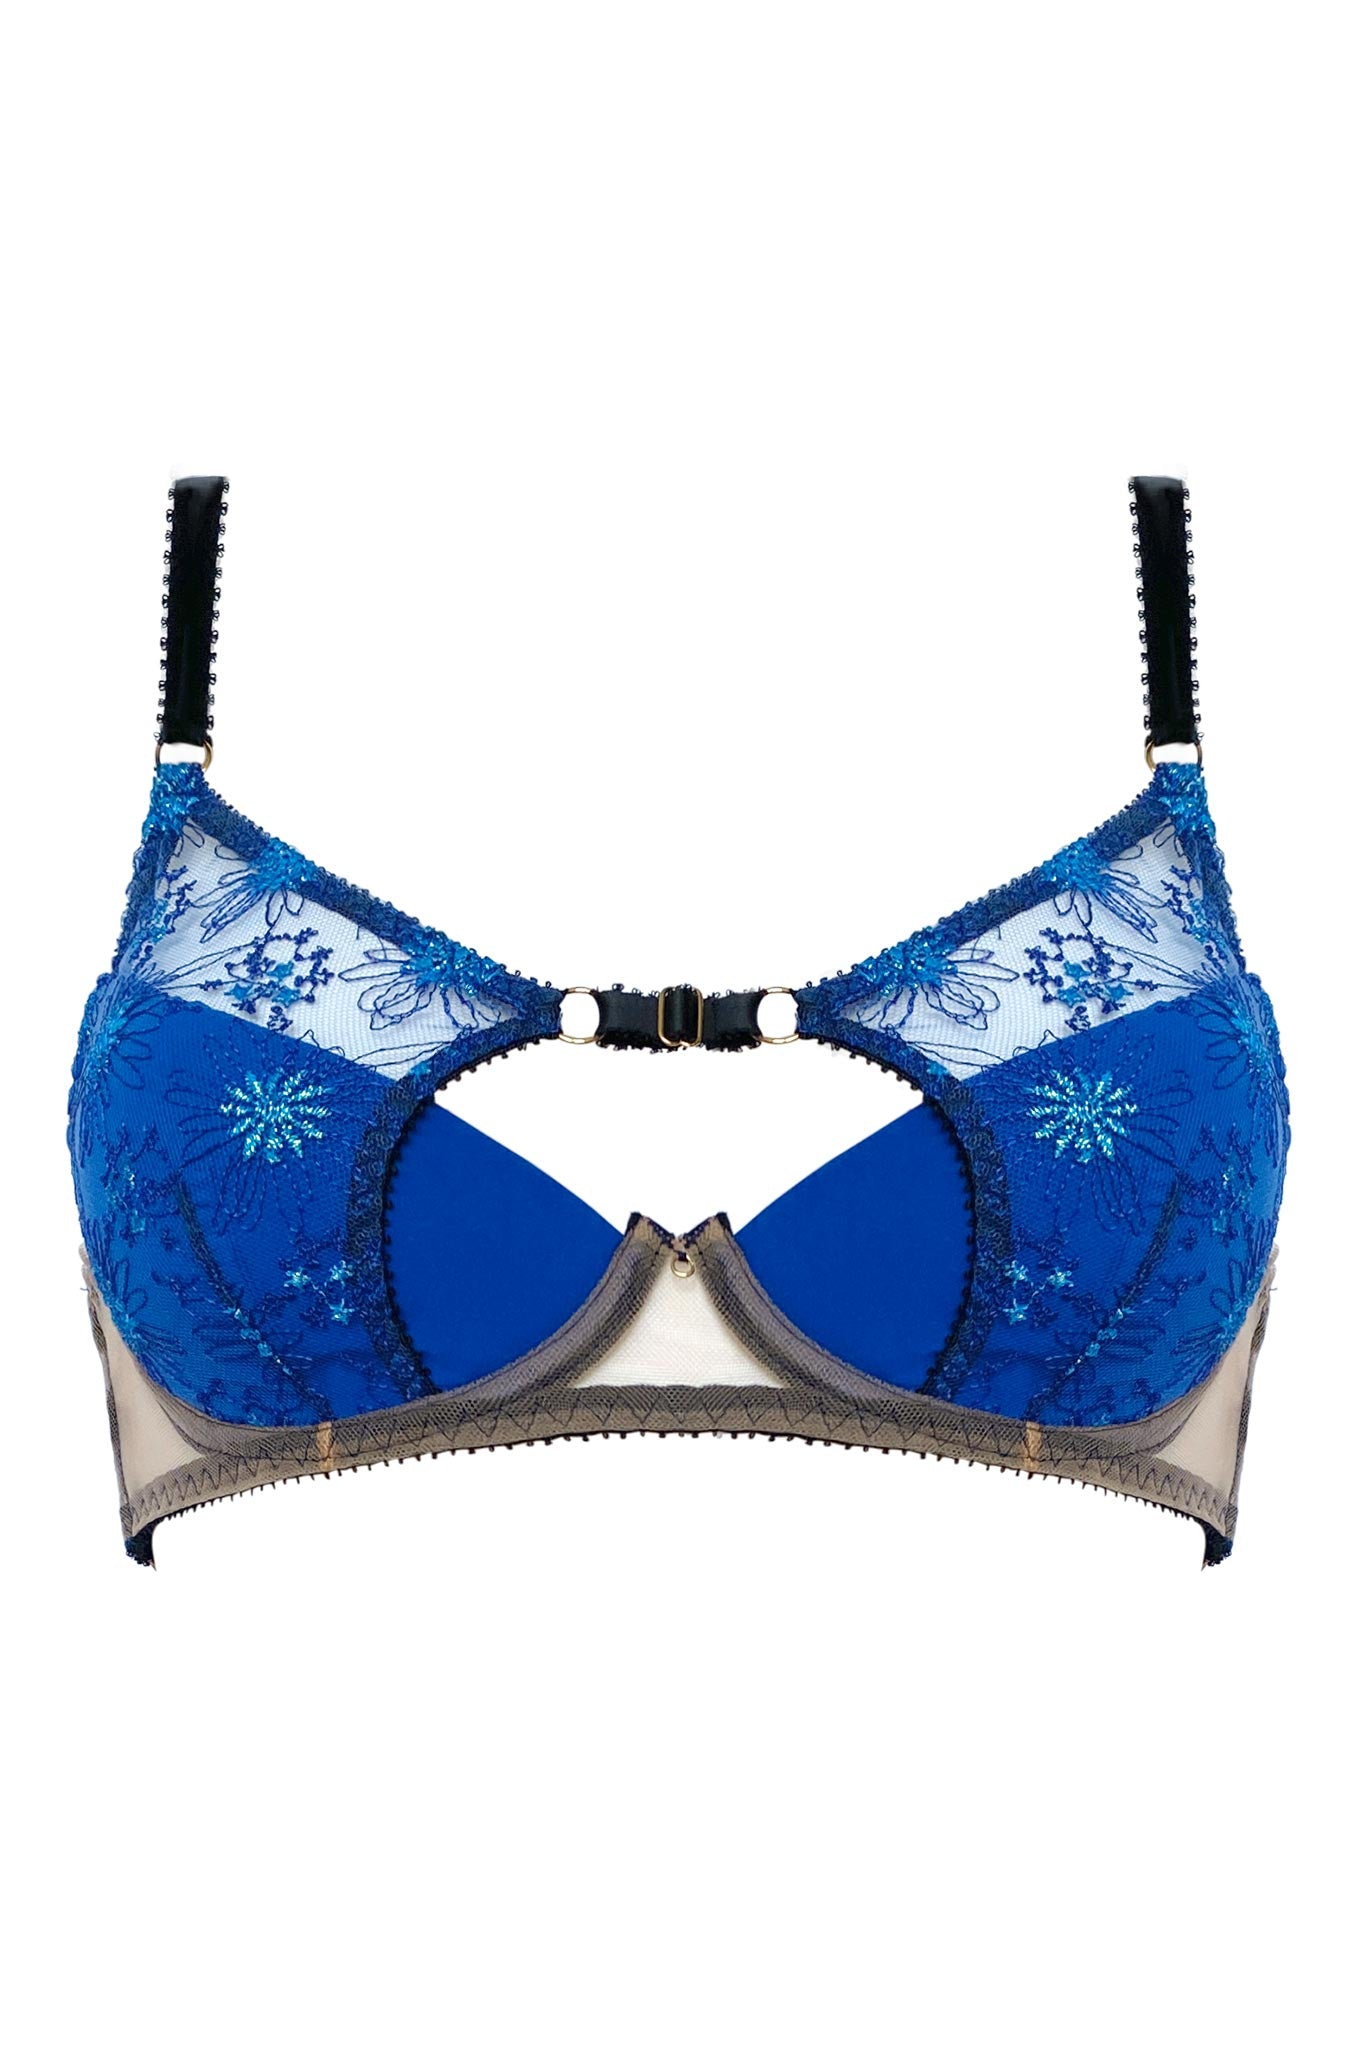 LingaDore 6623-89 Blue Animal Print Underwired Moulded Full Cup Bra 30E 